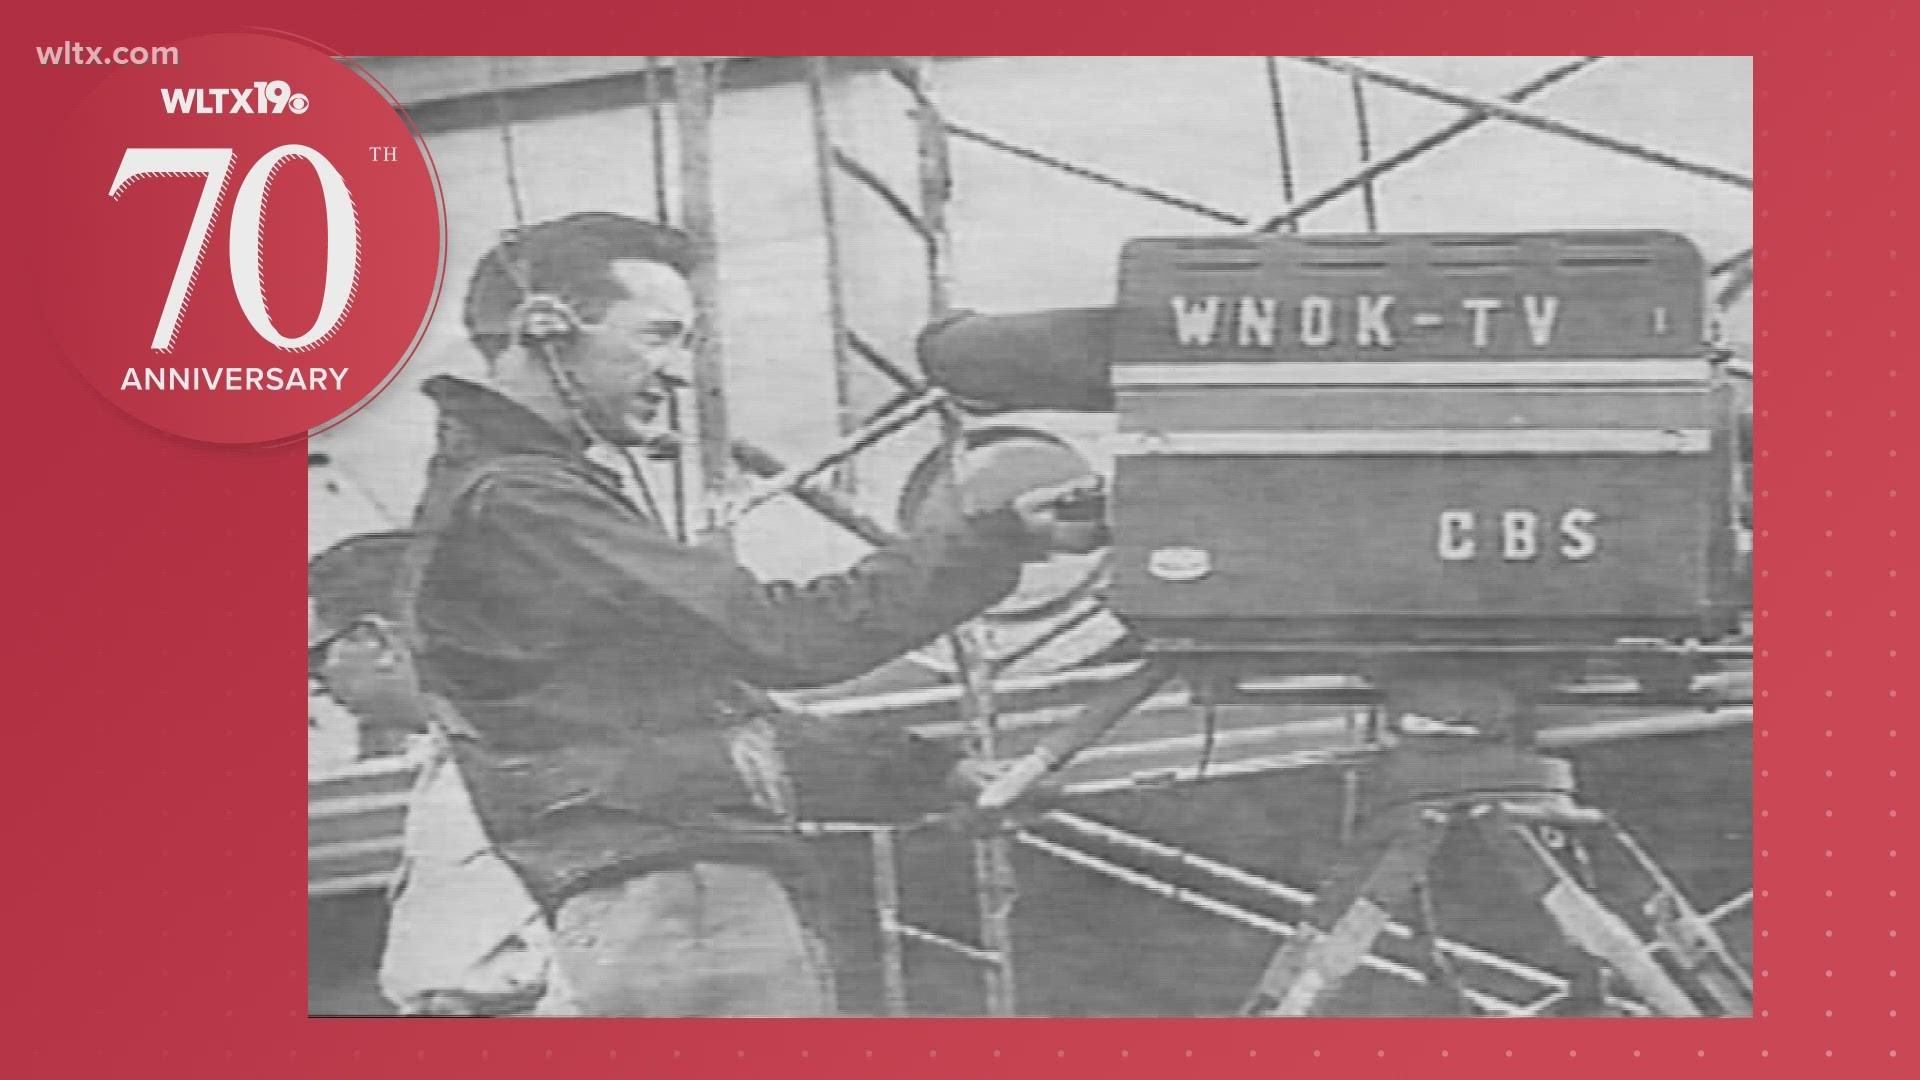 WLTX News 19 is celebrating 70 years here in the Midlands.